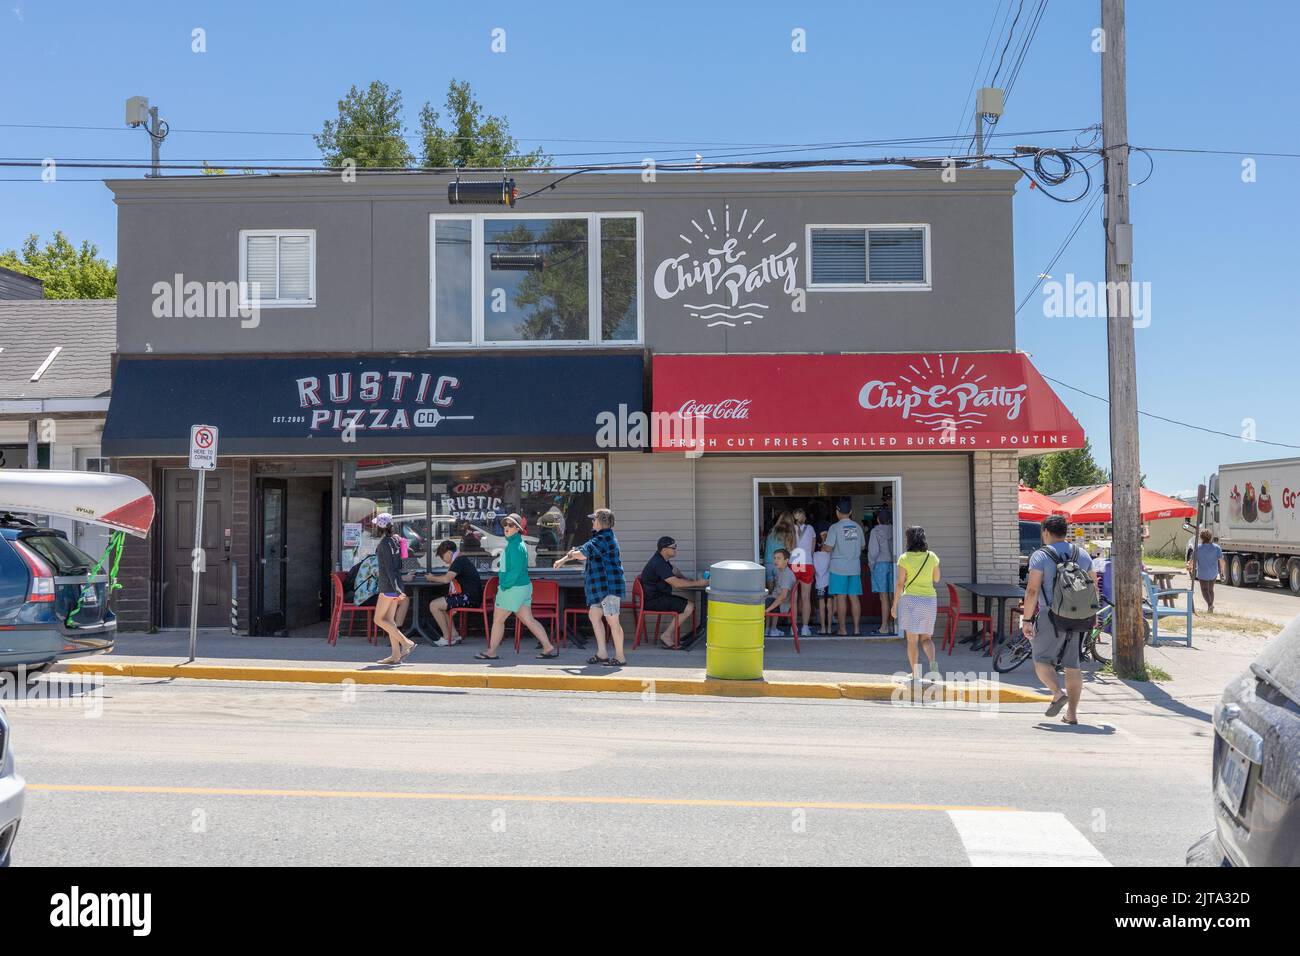 Beach Side Restaurants In Sauble Beach Fast Food, Pizza, Burgers And Chips, On Main St Sauble Beach, Ontario Canada Stock Photo